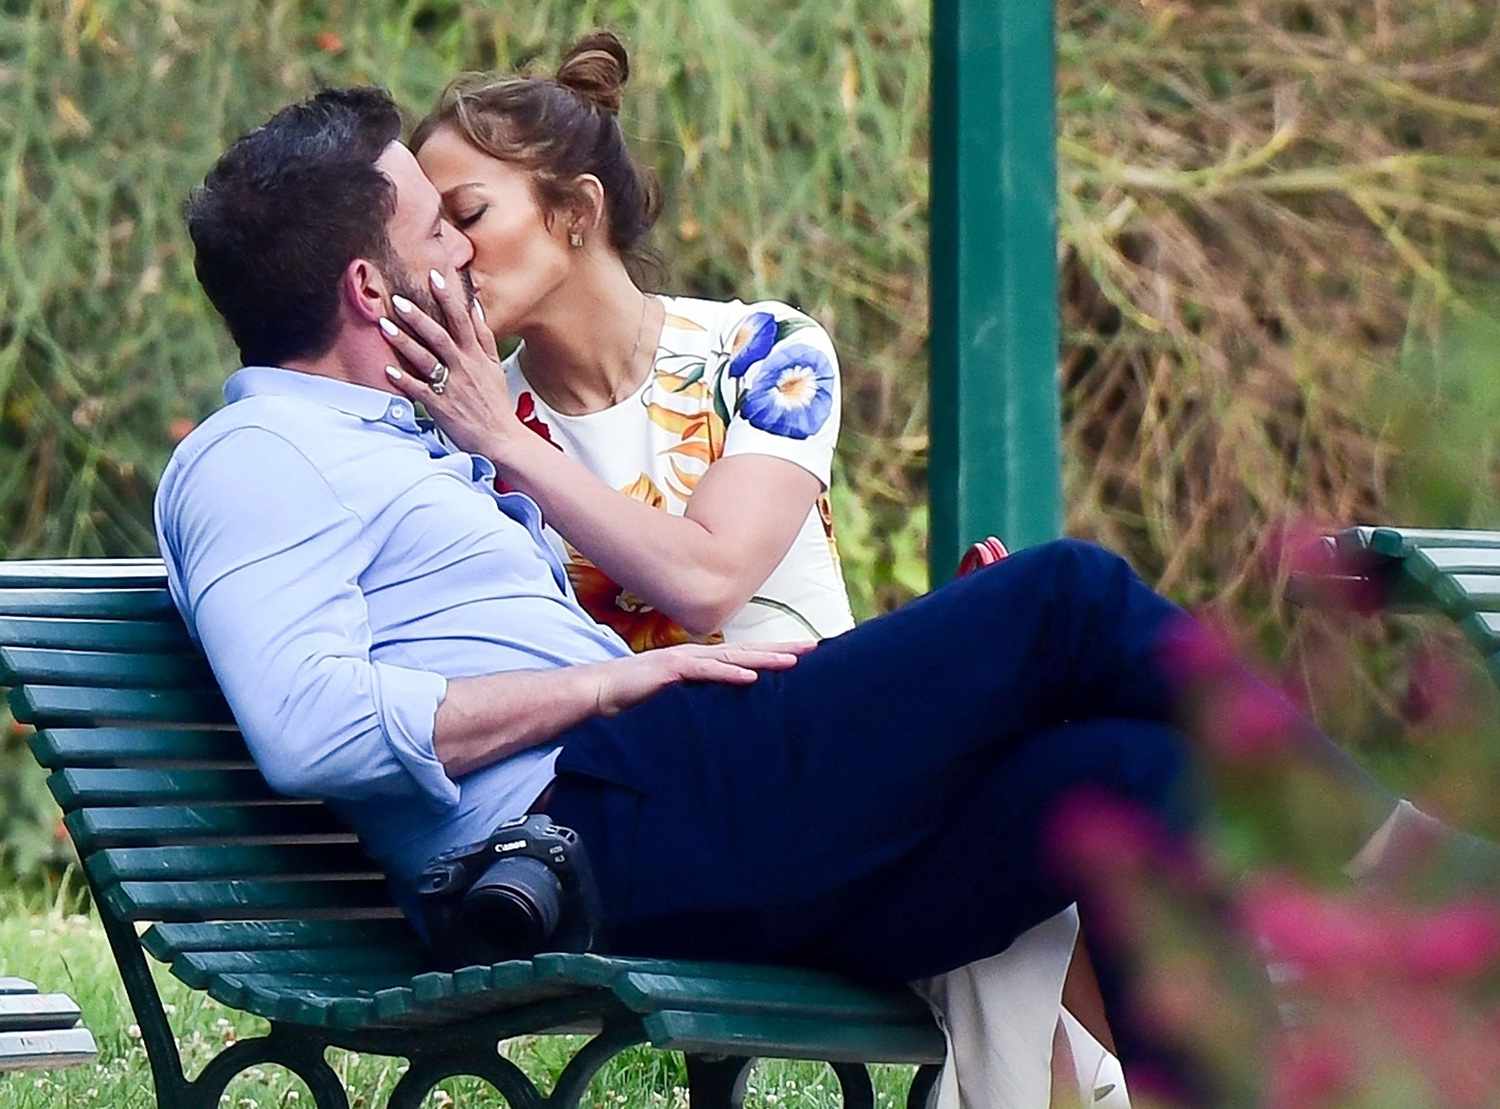 *PREMIUM-EXCLUSIVE* - Newly Married couple Ben Affleck and his wife Jennifer Affleck (Lopez) show off their undying love for each other by holding hands as they stroll through the gardens next to the Elysée Palace on their honeymoon in Paris